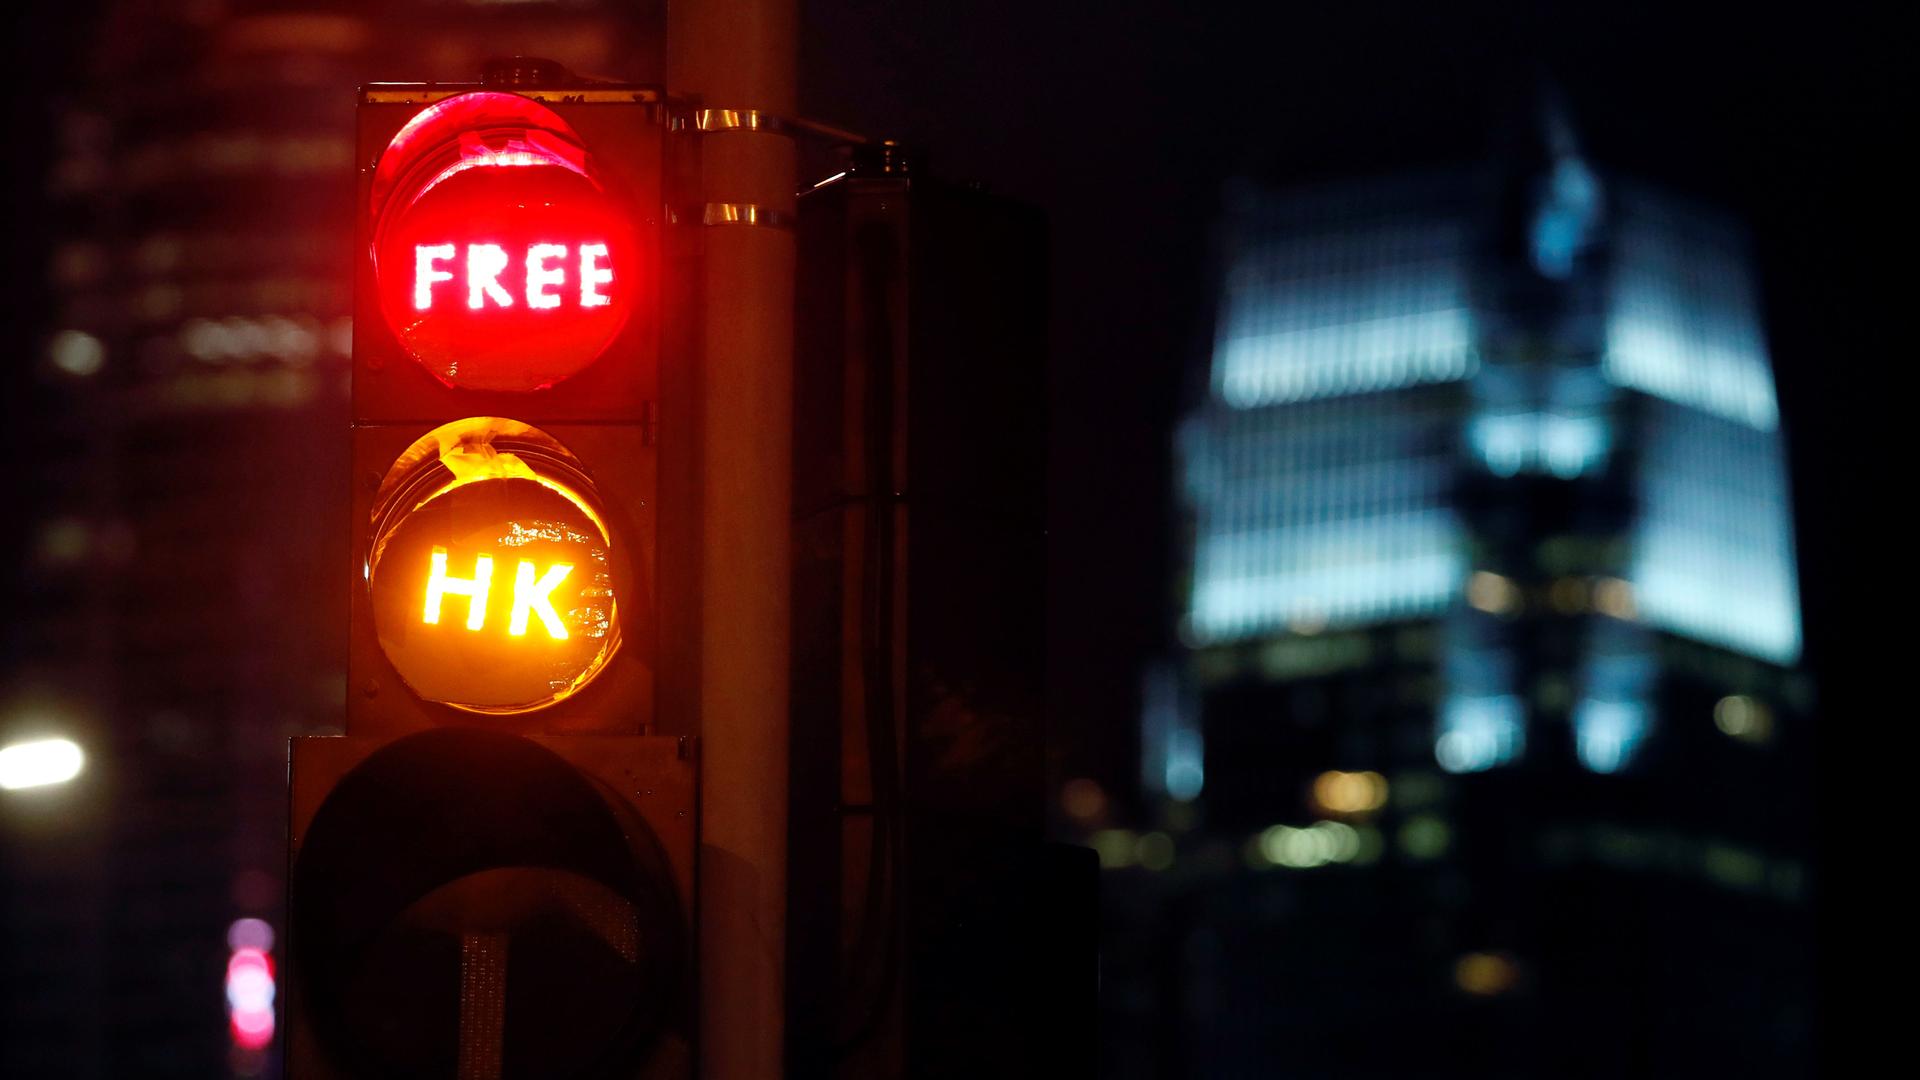 A traffic light reading "Free HK" across the red and yellow lights. 